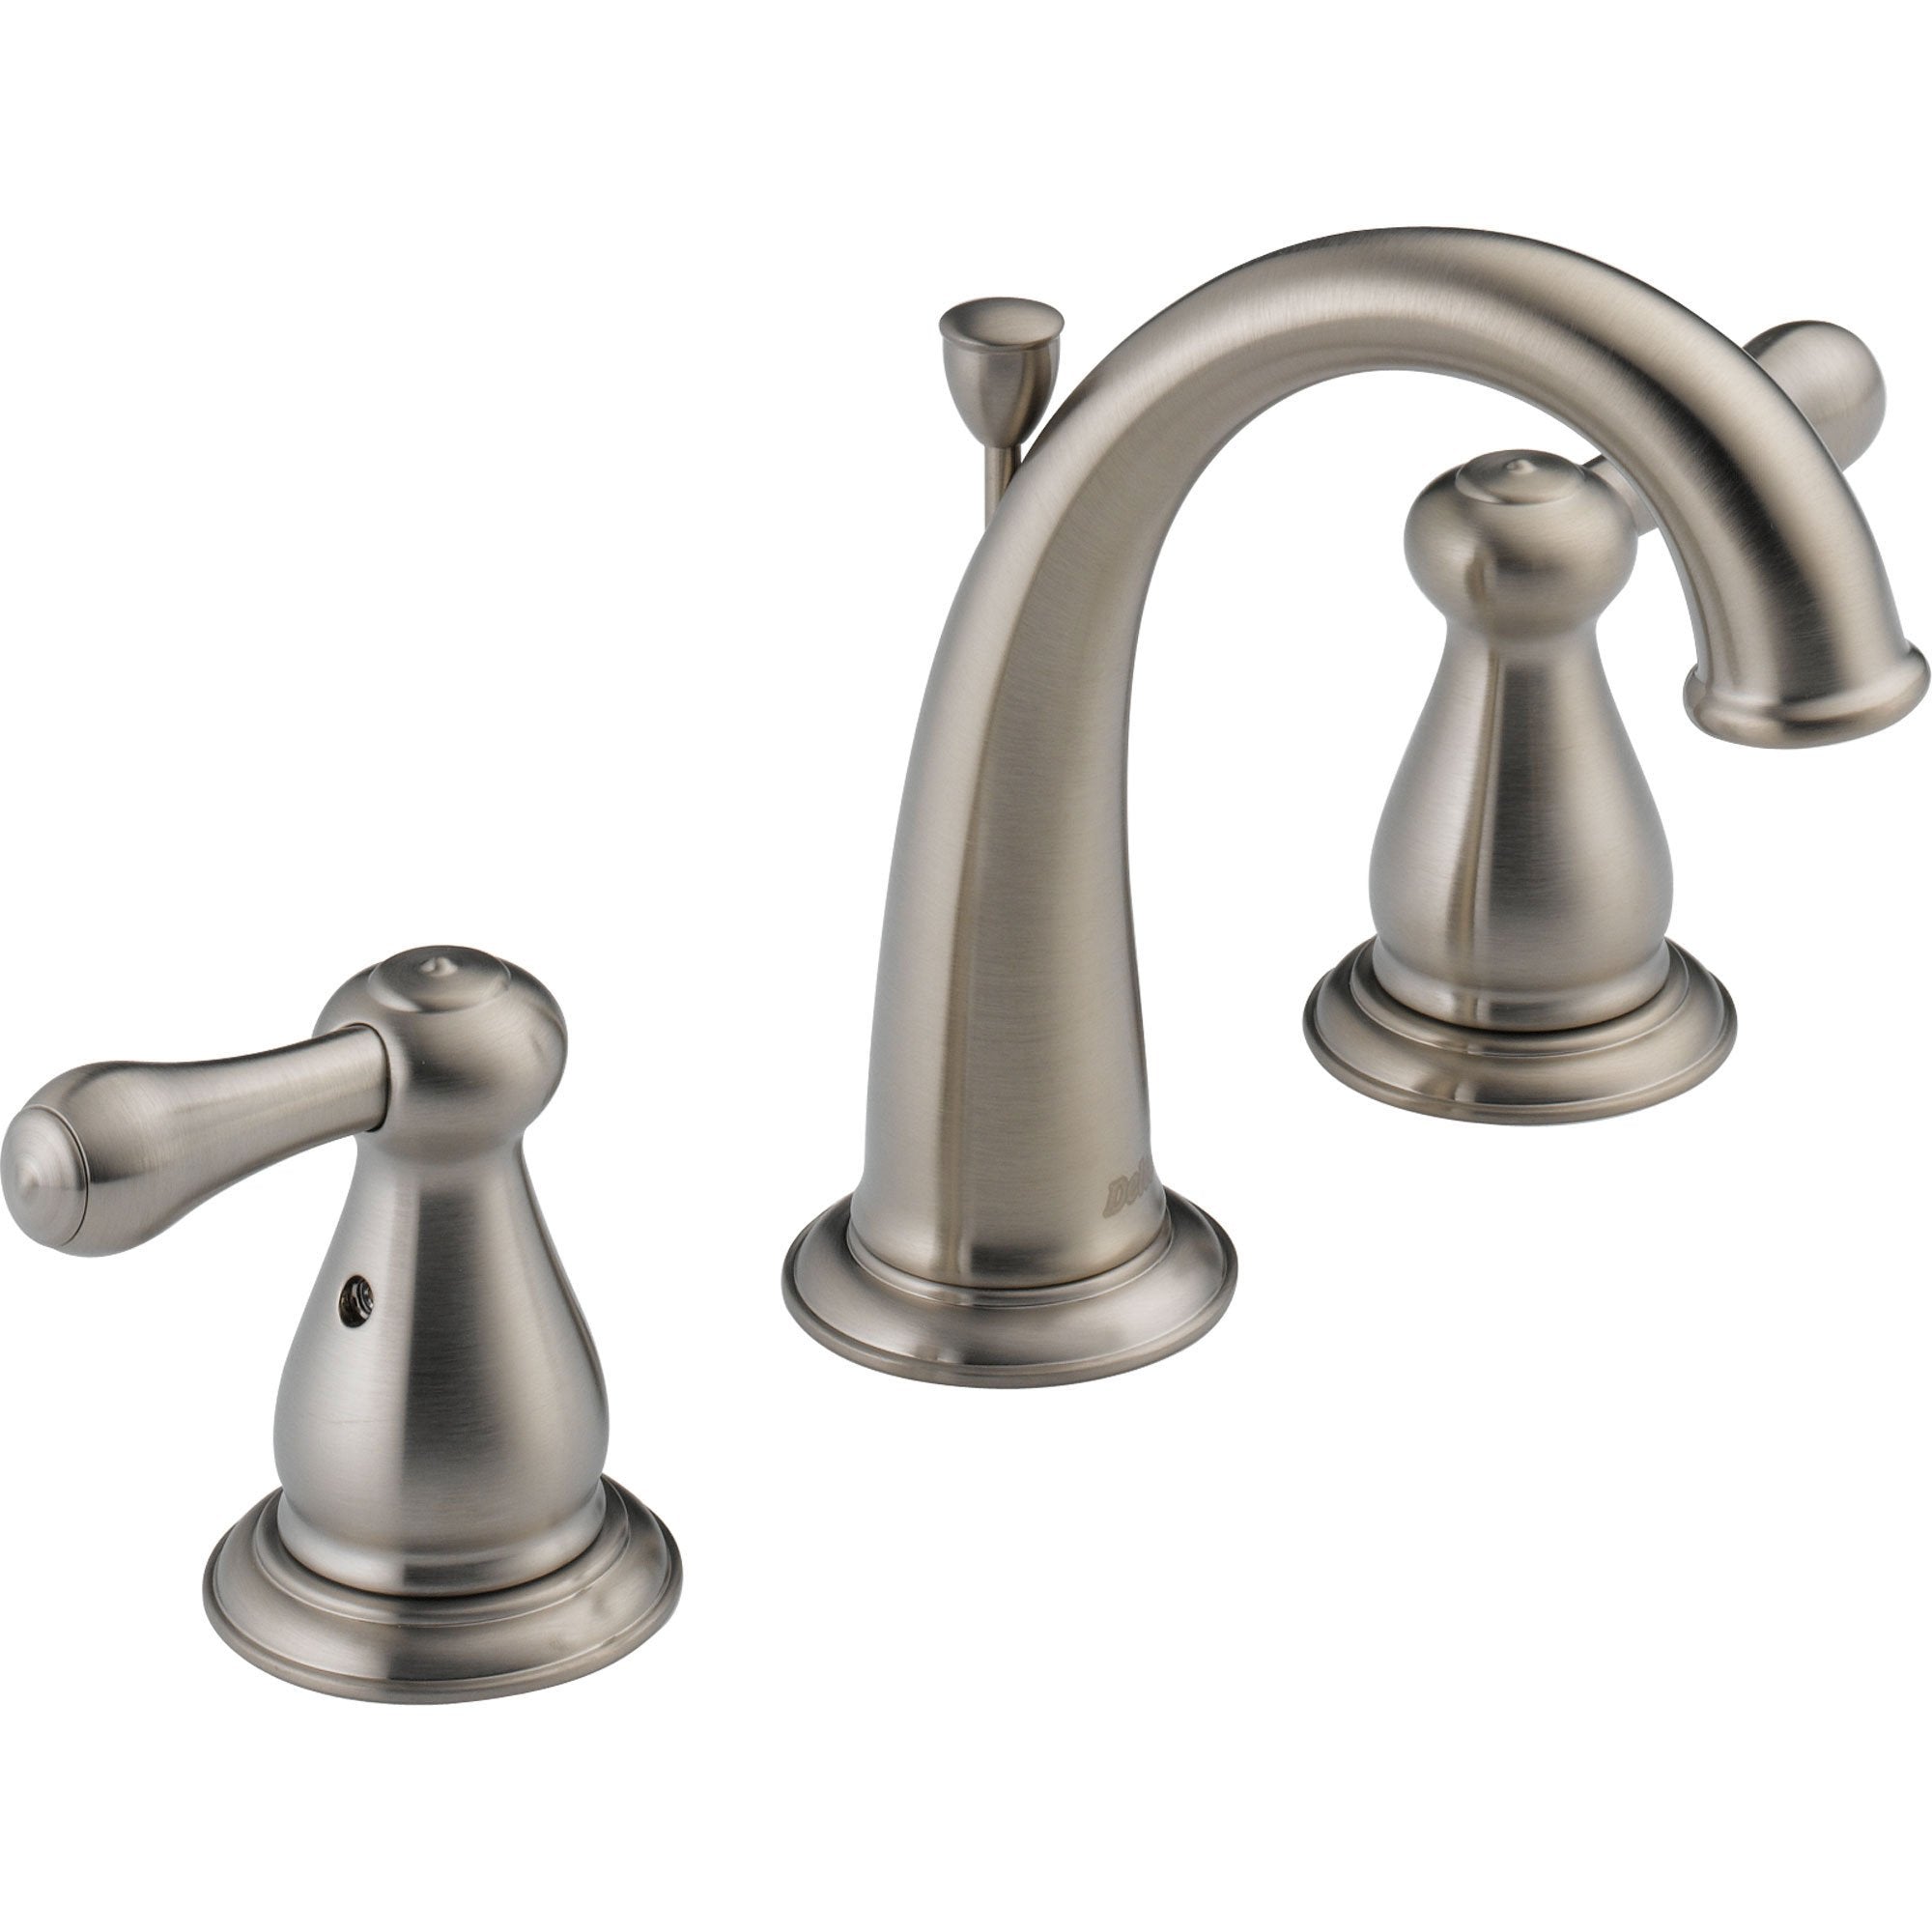 Delta Leland 8 in. 2-Handle High Arc Bathroom Faucet in Stainless Finish 572935